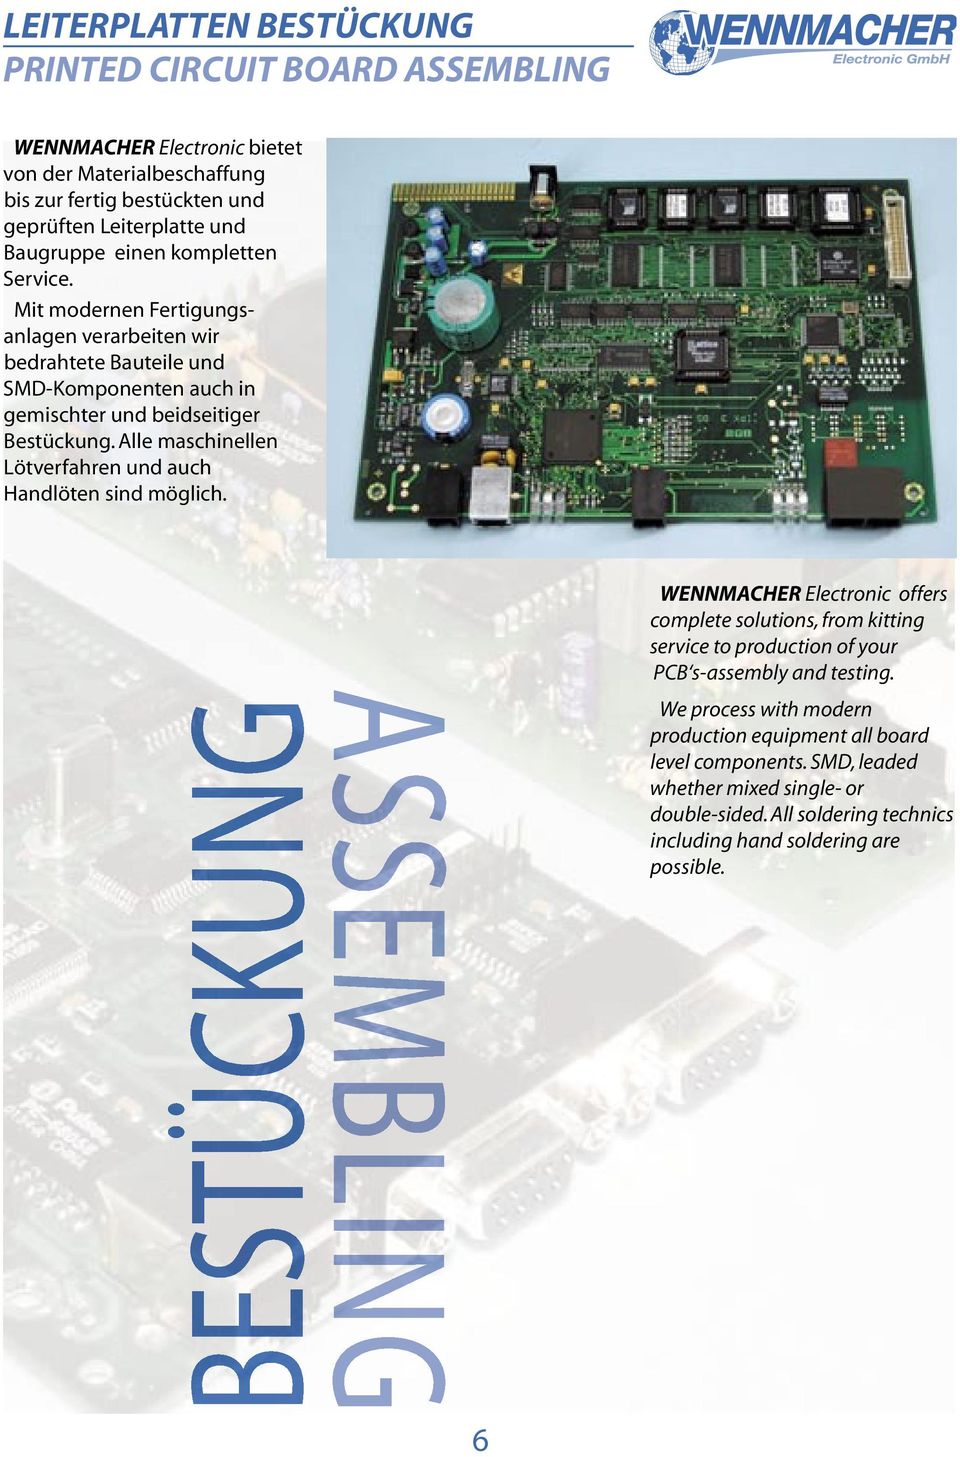 Alle maschinellen Lötverfahren und auch Handlöten sind möglich. WENNMACHER Electronic offers complete solutions, from kitting service to production of your PCB s-assembly and testing.